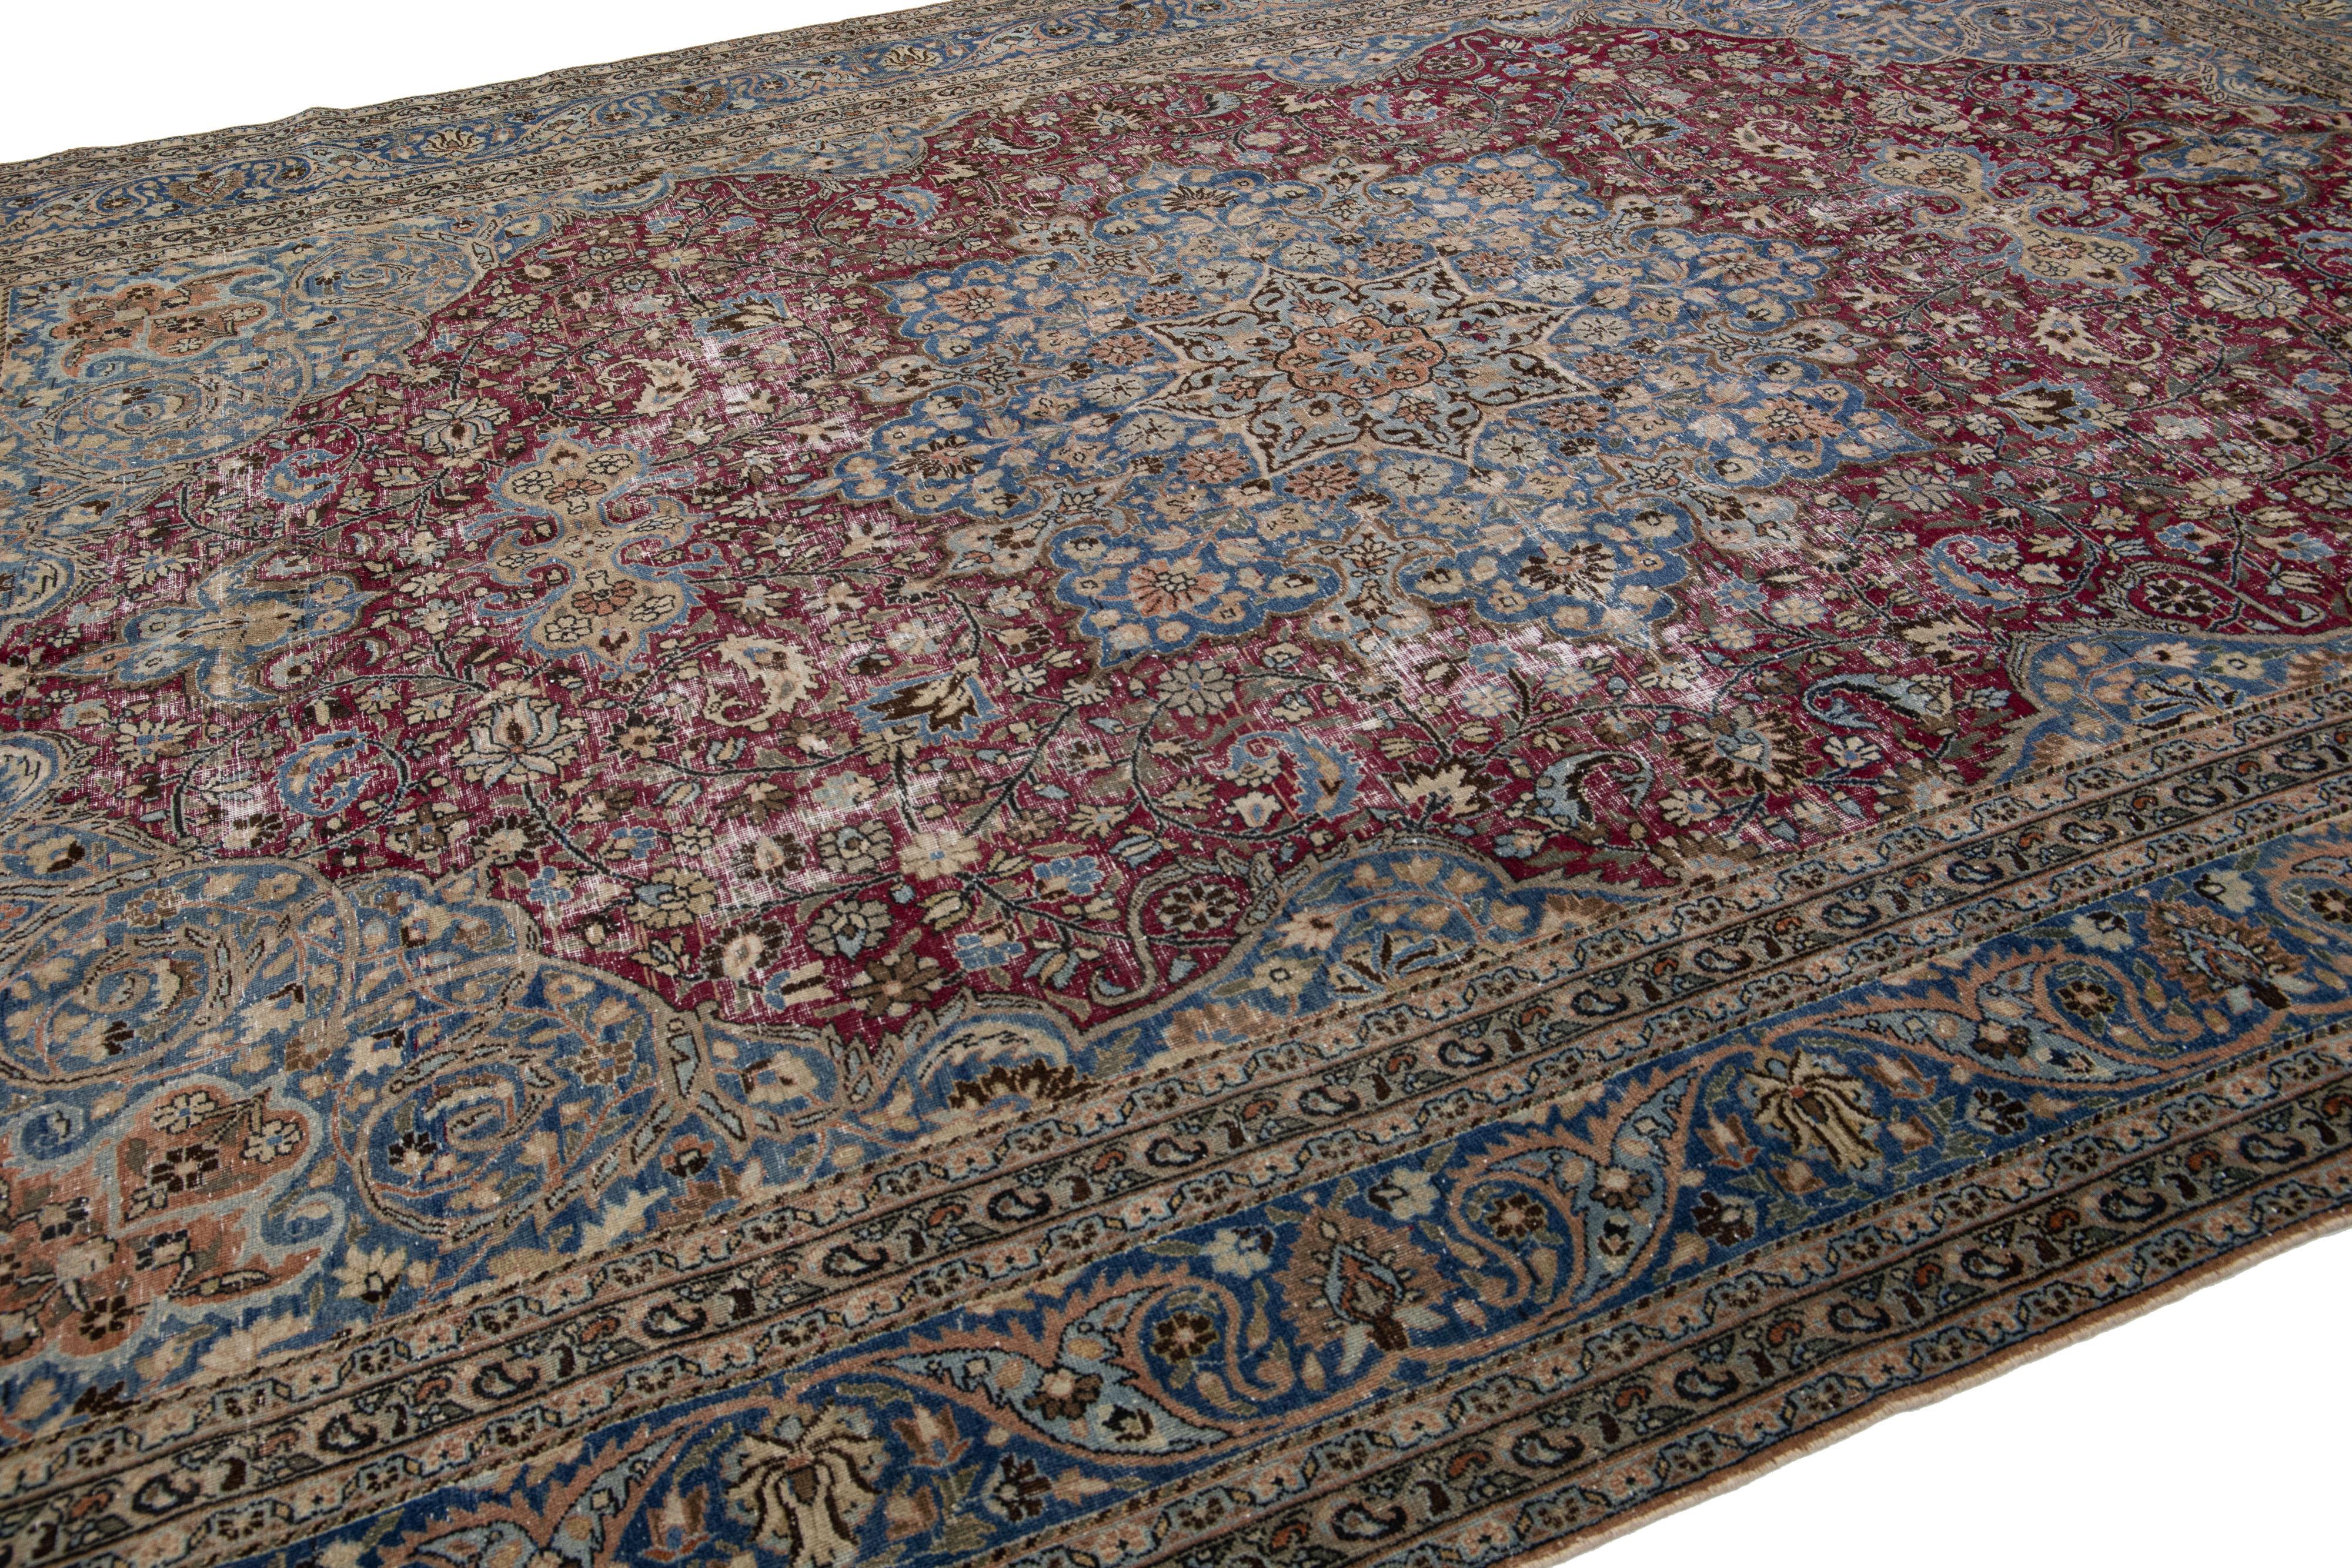 Antique Persian Mashad Red and Blue Handmade Wool Rug with Rosette Motif In Distressed Condition For Sale In Norwalk, CT